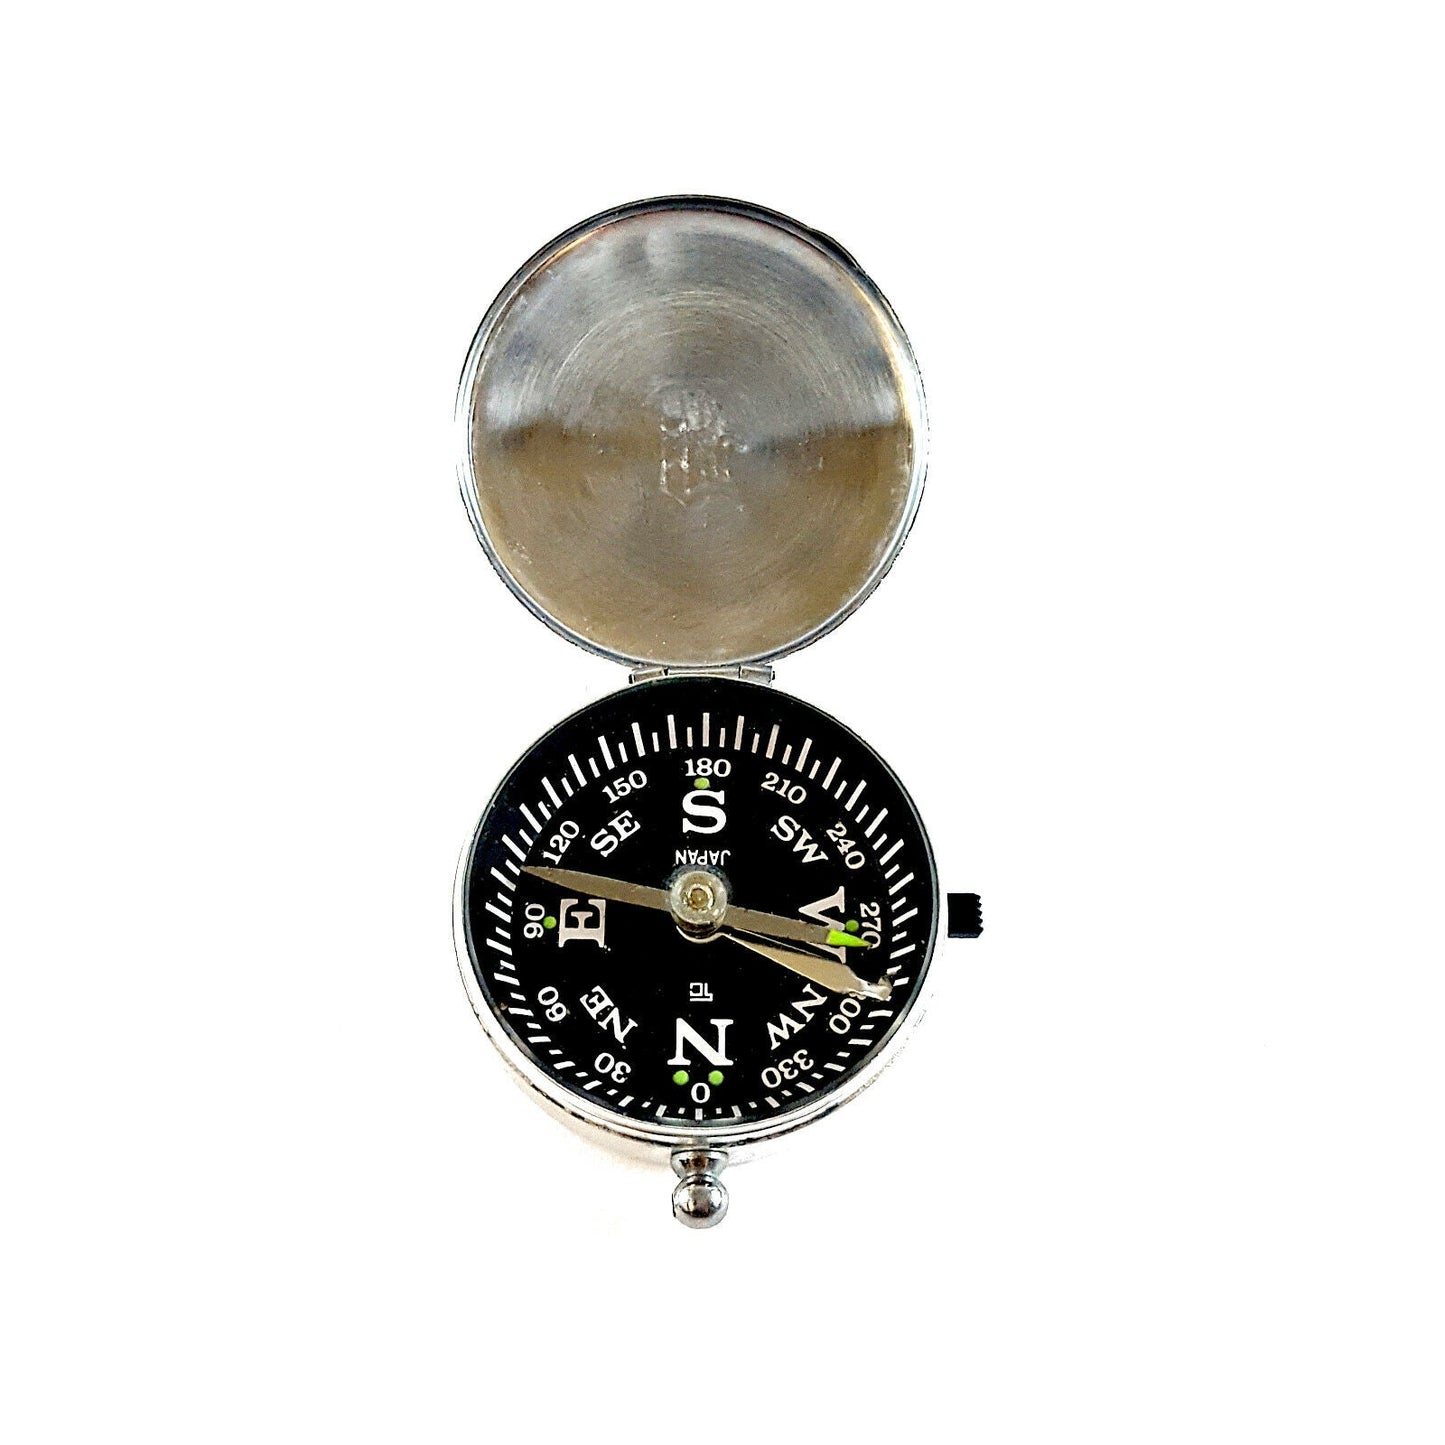 Japan Magnetic Pocket Compass with Metal Case